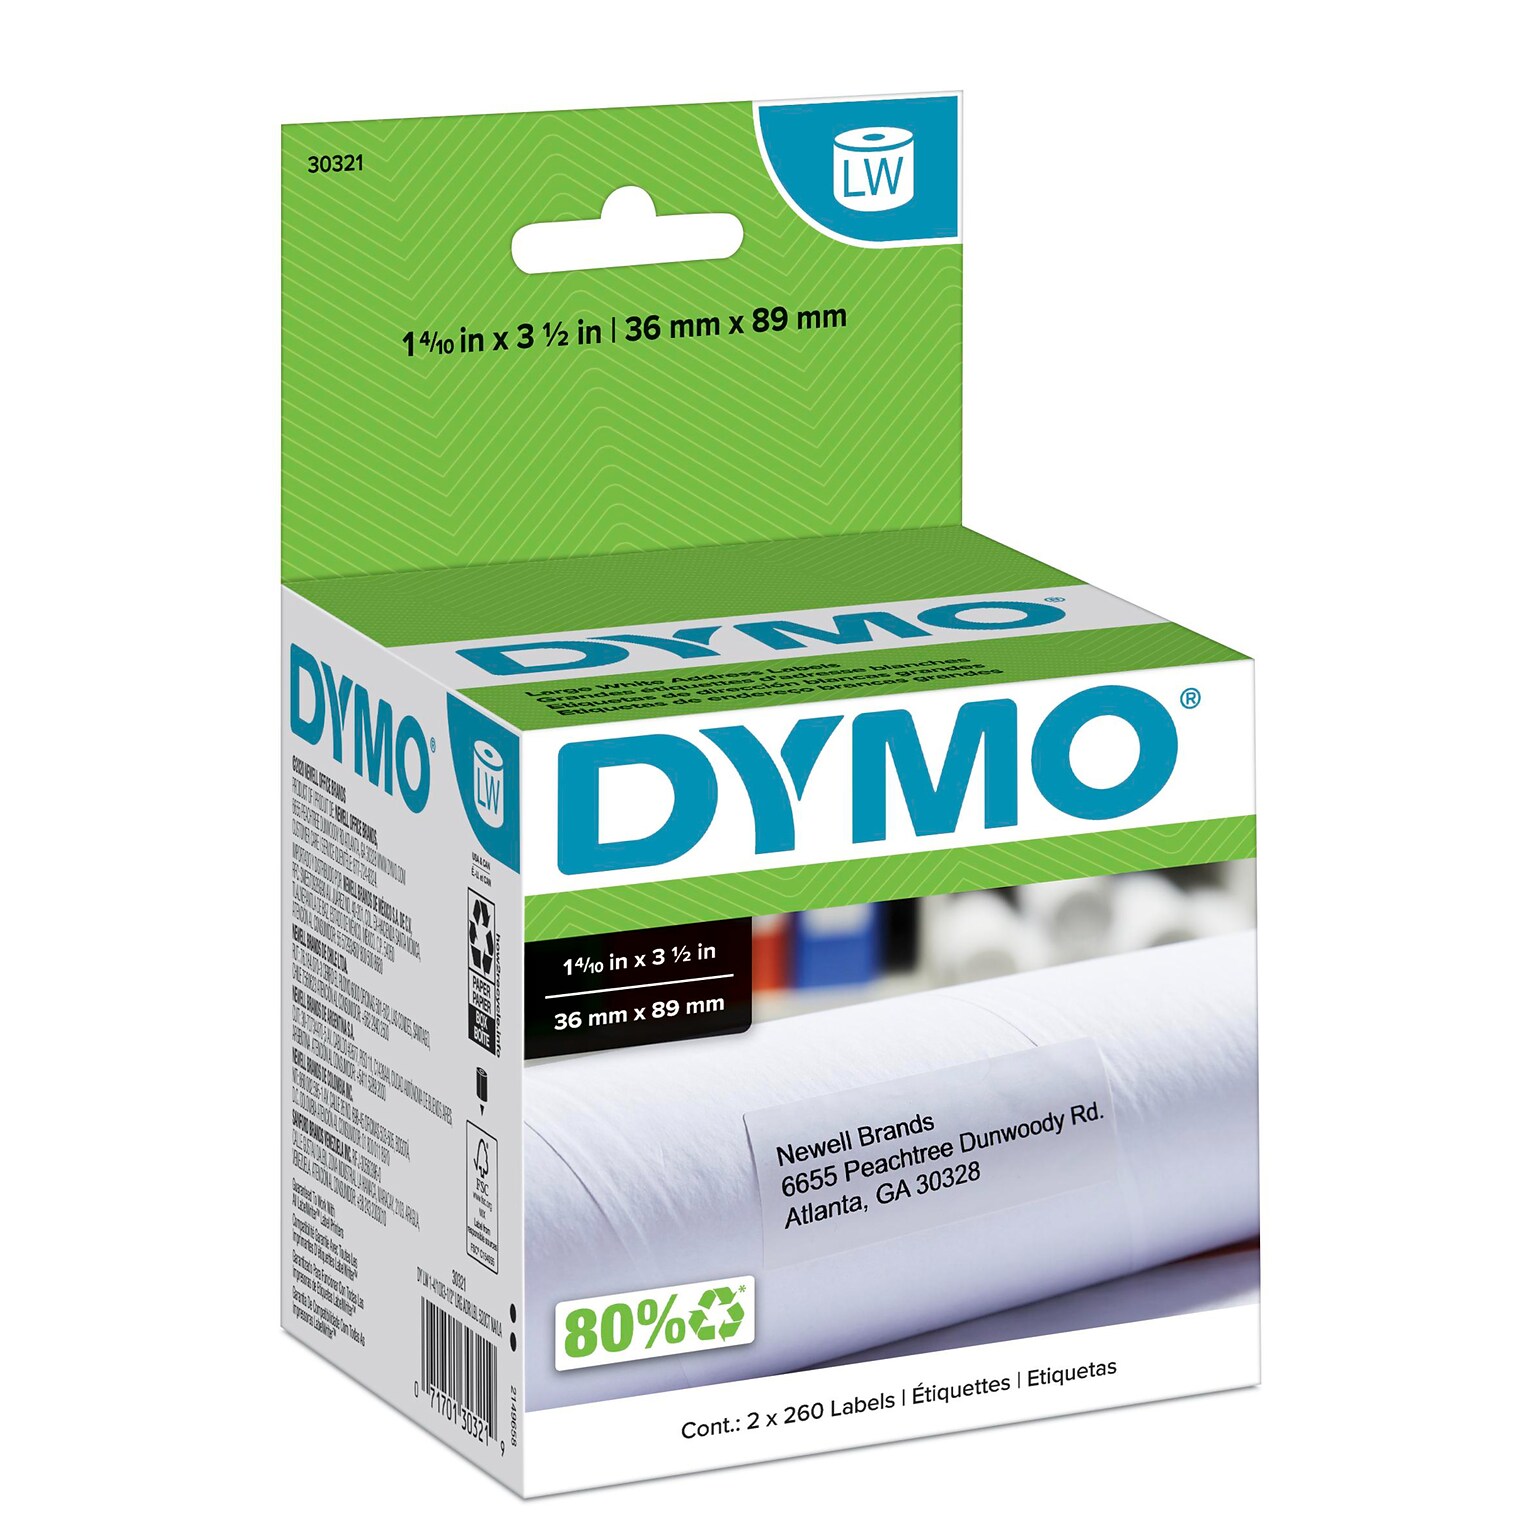 DYMO LabelWriter 30321 Large Mailing Address Labels, 3-1/2 x 1-4/10, Black on White, 260 Labels/Roll, 2 Rolls/Box (30321)